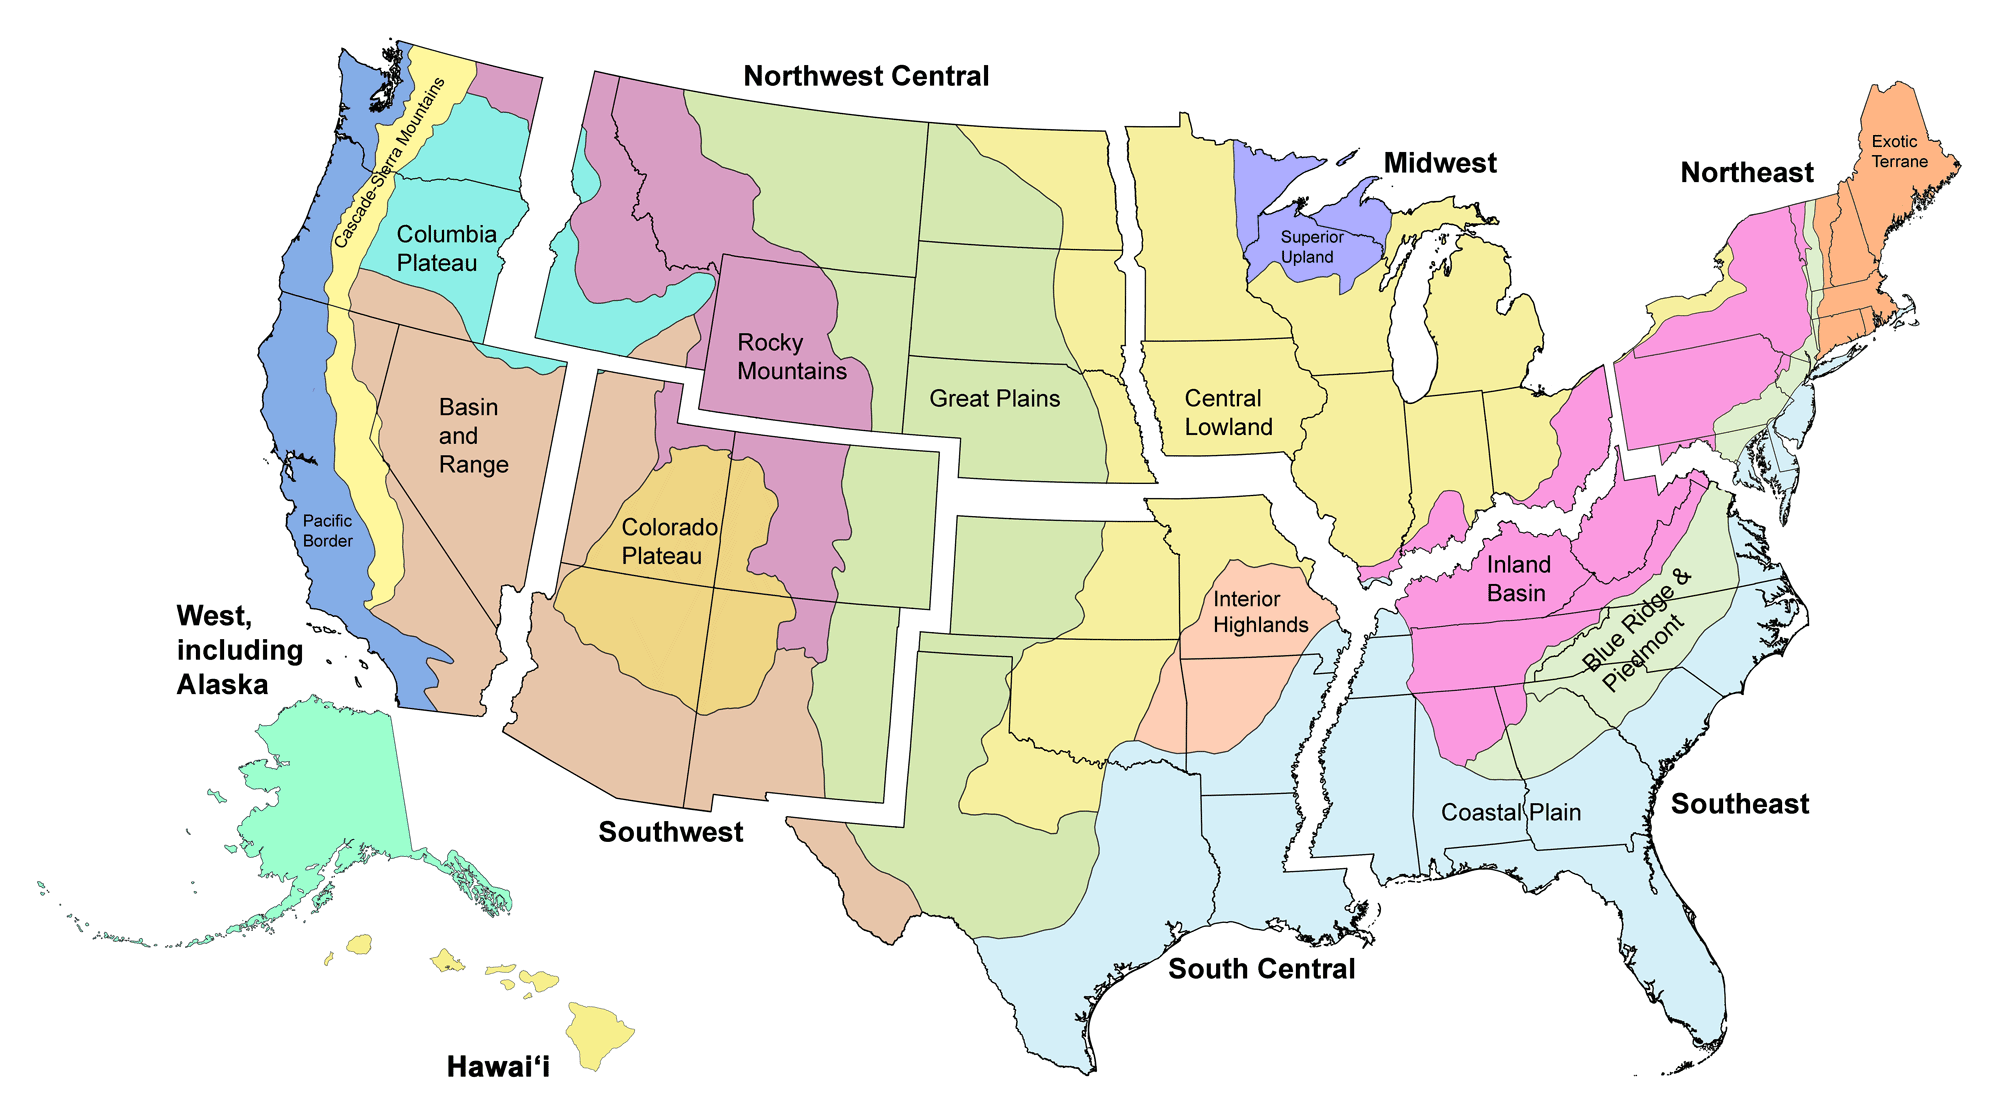 Map showing the major physiographic regions of the United States.